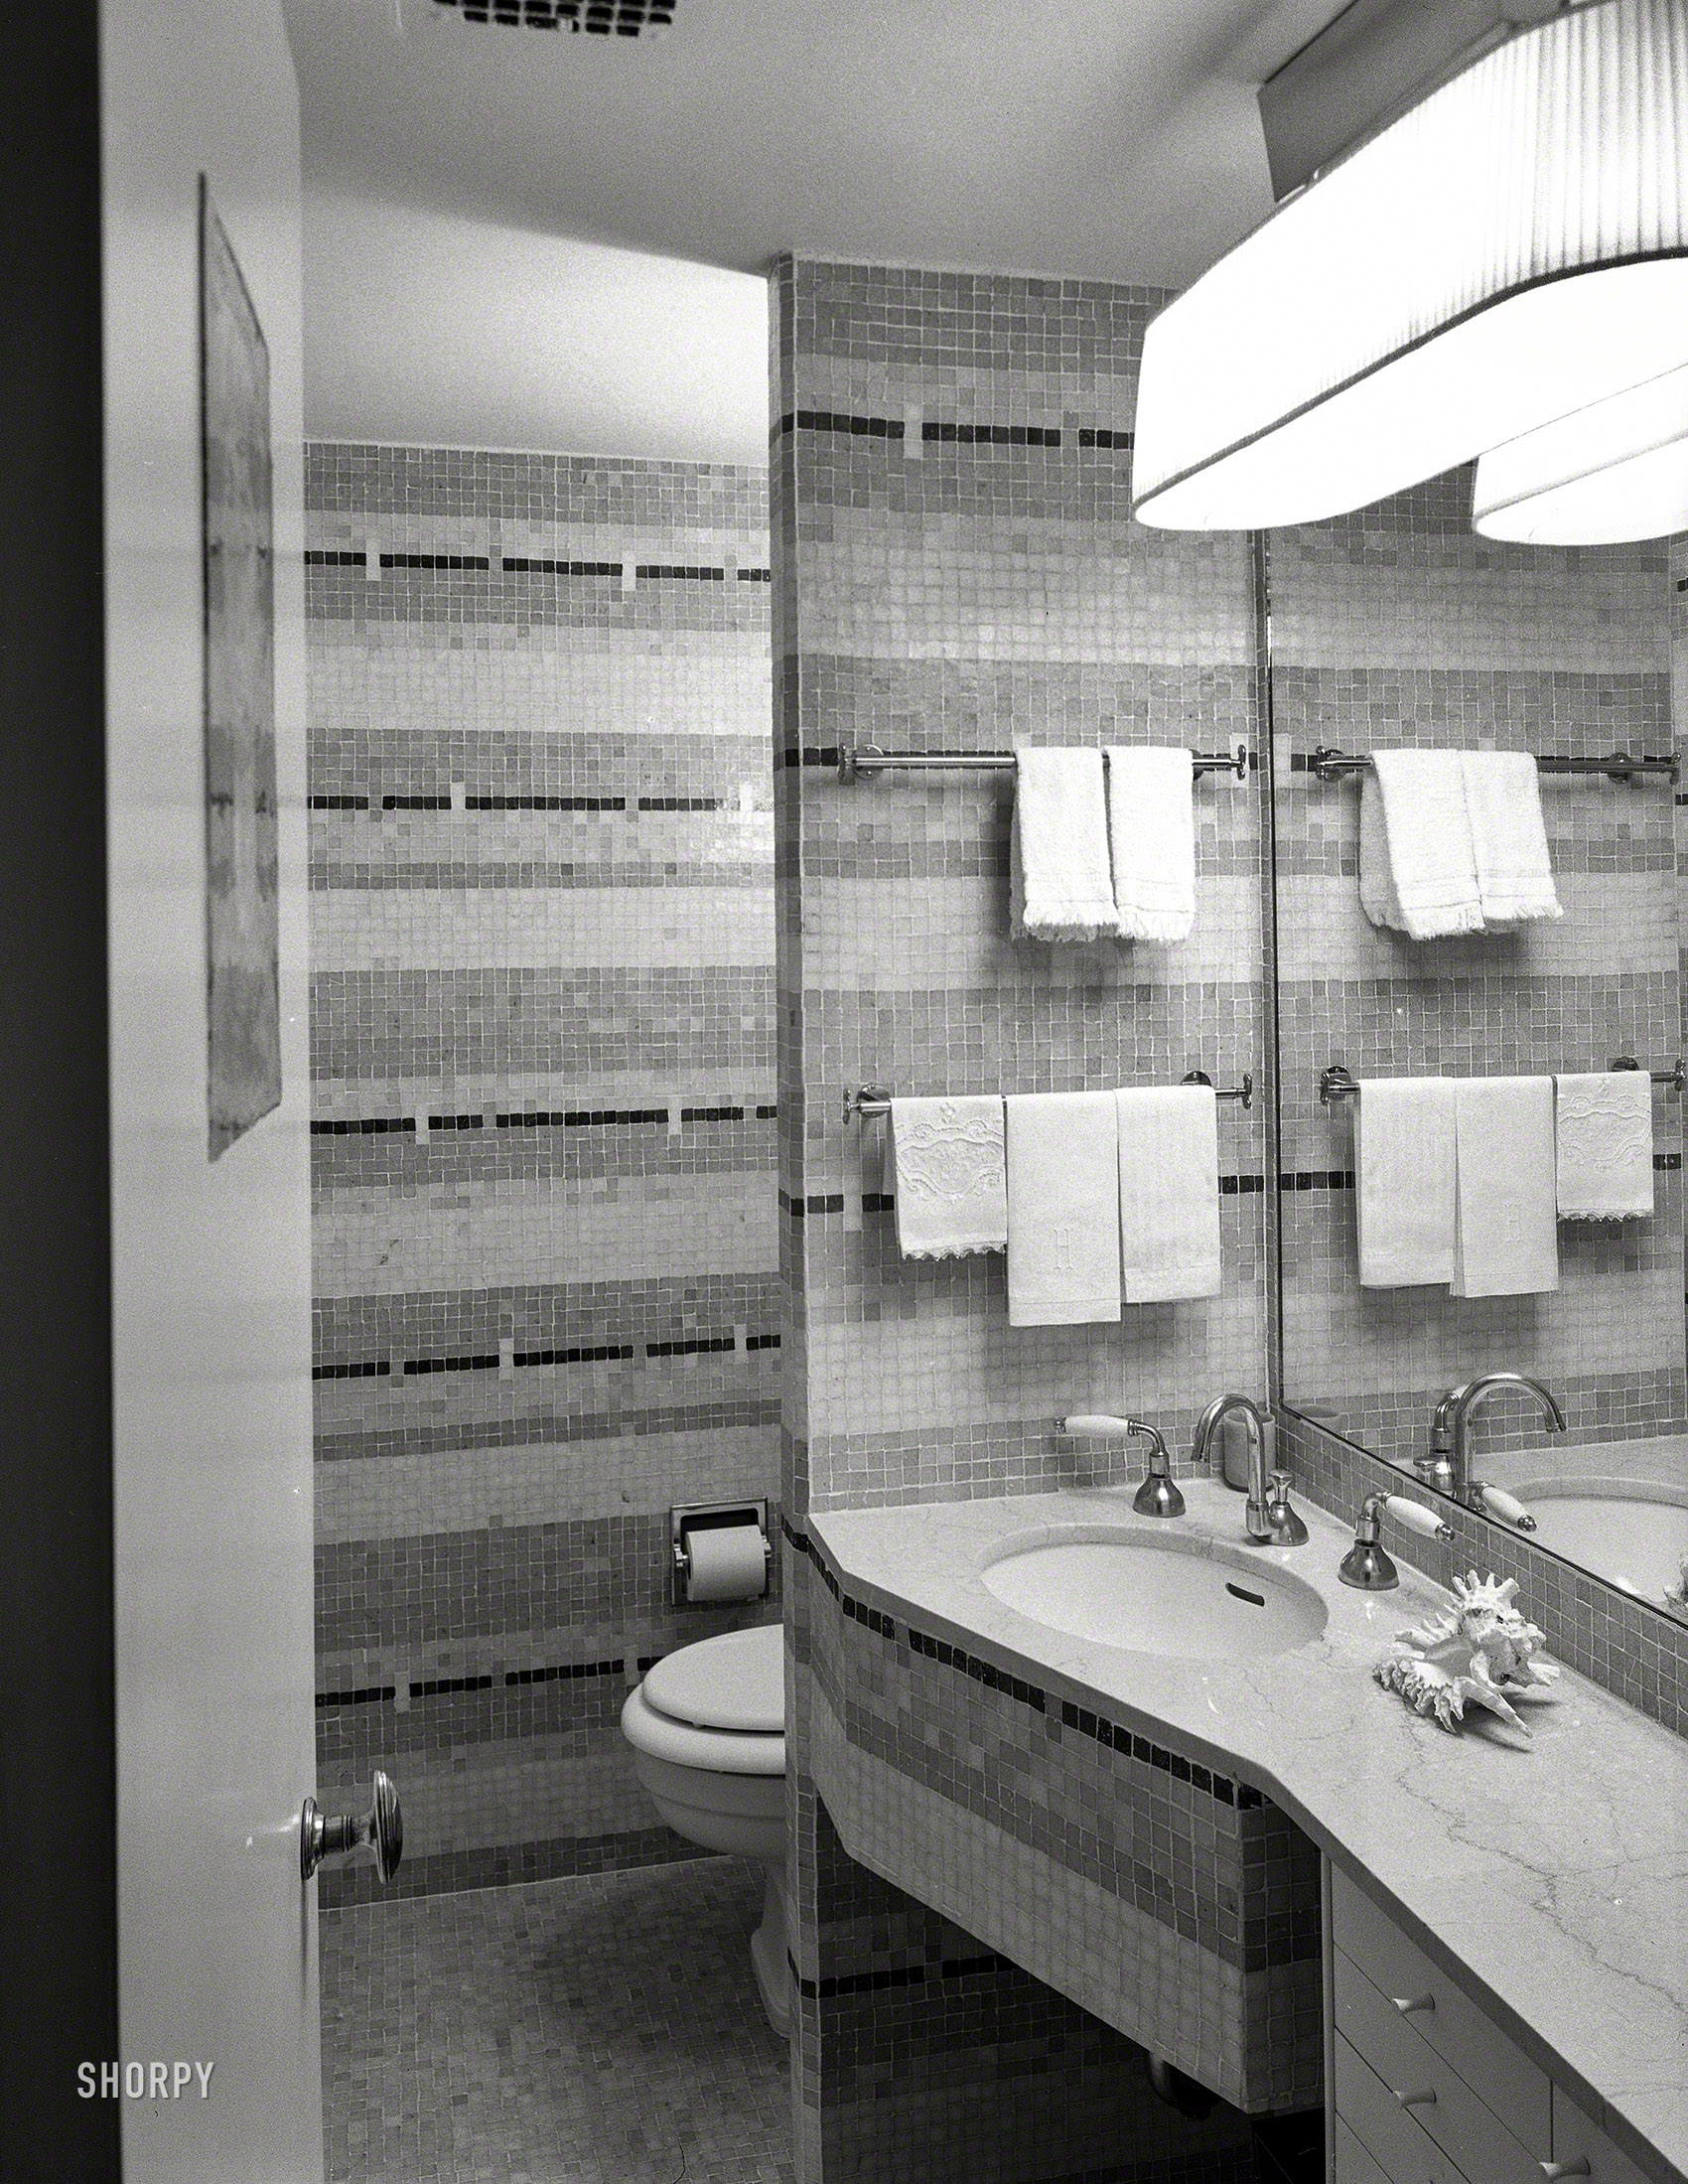 Jan. 25, 1954. "H.F. Fischbach, residence at Hampshire House, Central Park South. Tile bathroom." You'll come for the plumbing but stay for the towels. Large-format acetate negative by Gottscho-Schleisner. View full size.